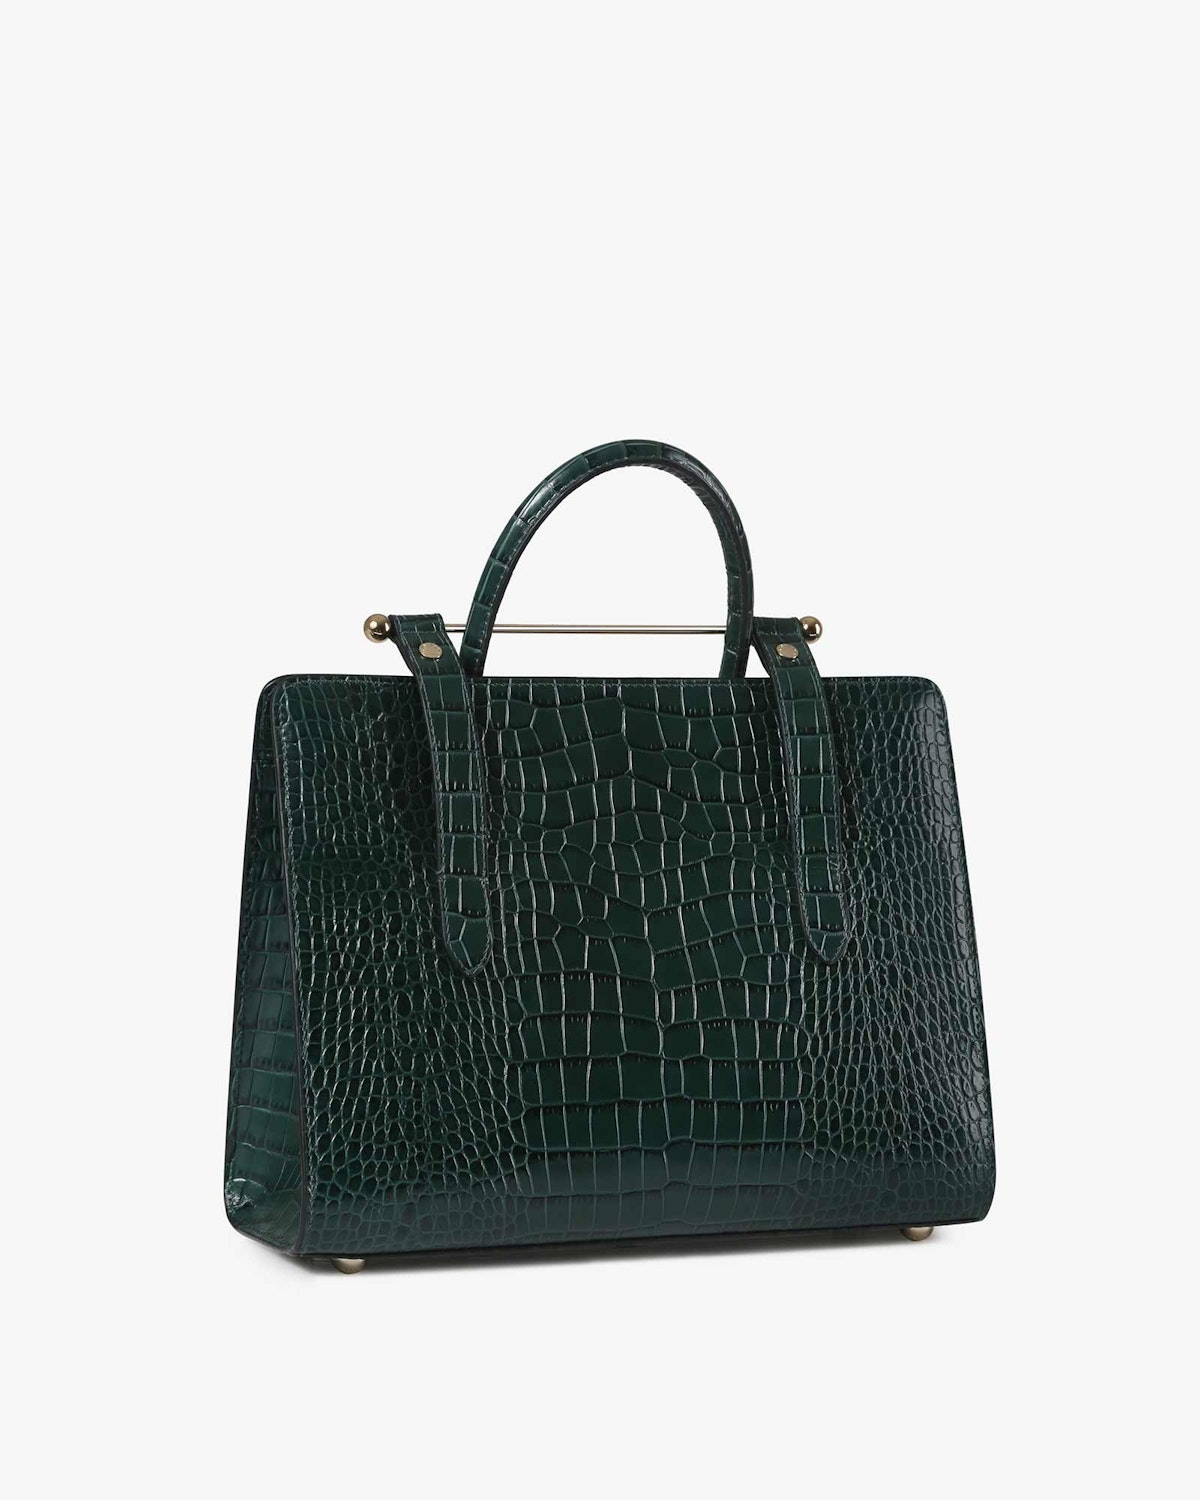 The Strathberry Midi Tote - Top Handle Leather Tote Bag - Green ...